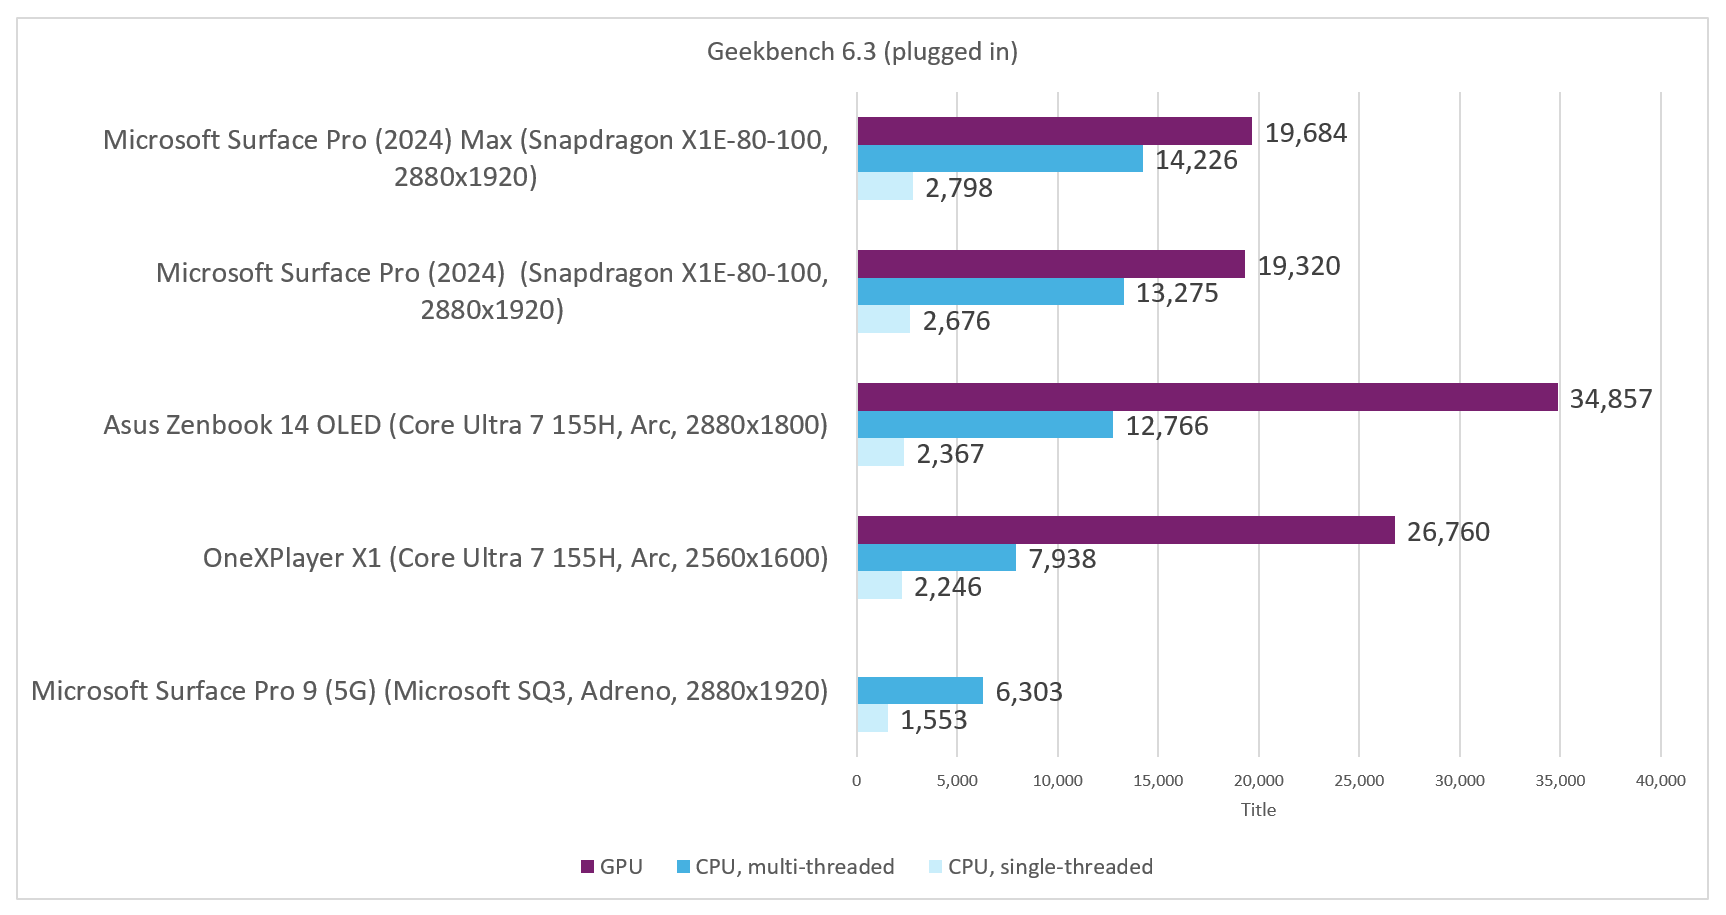 Microsoft Surface Pro 2024 11th Edition Geekbench plugged in